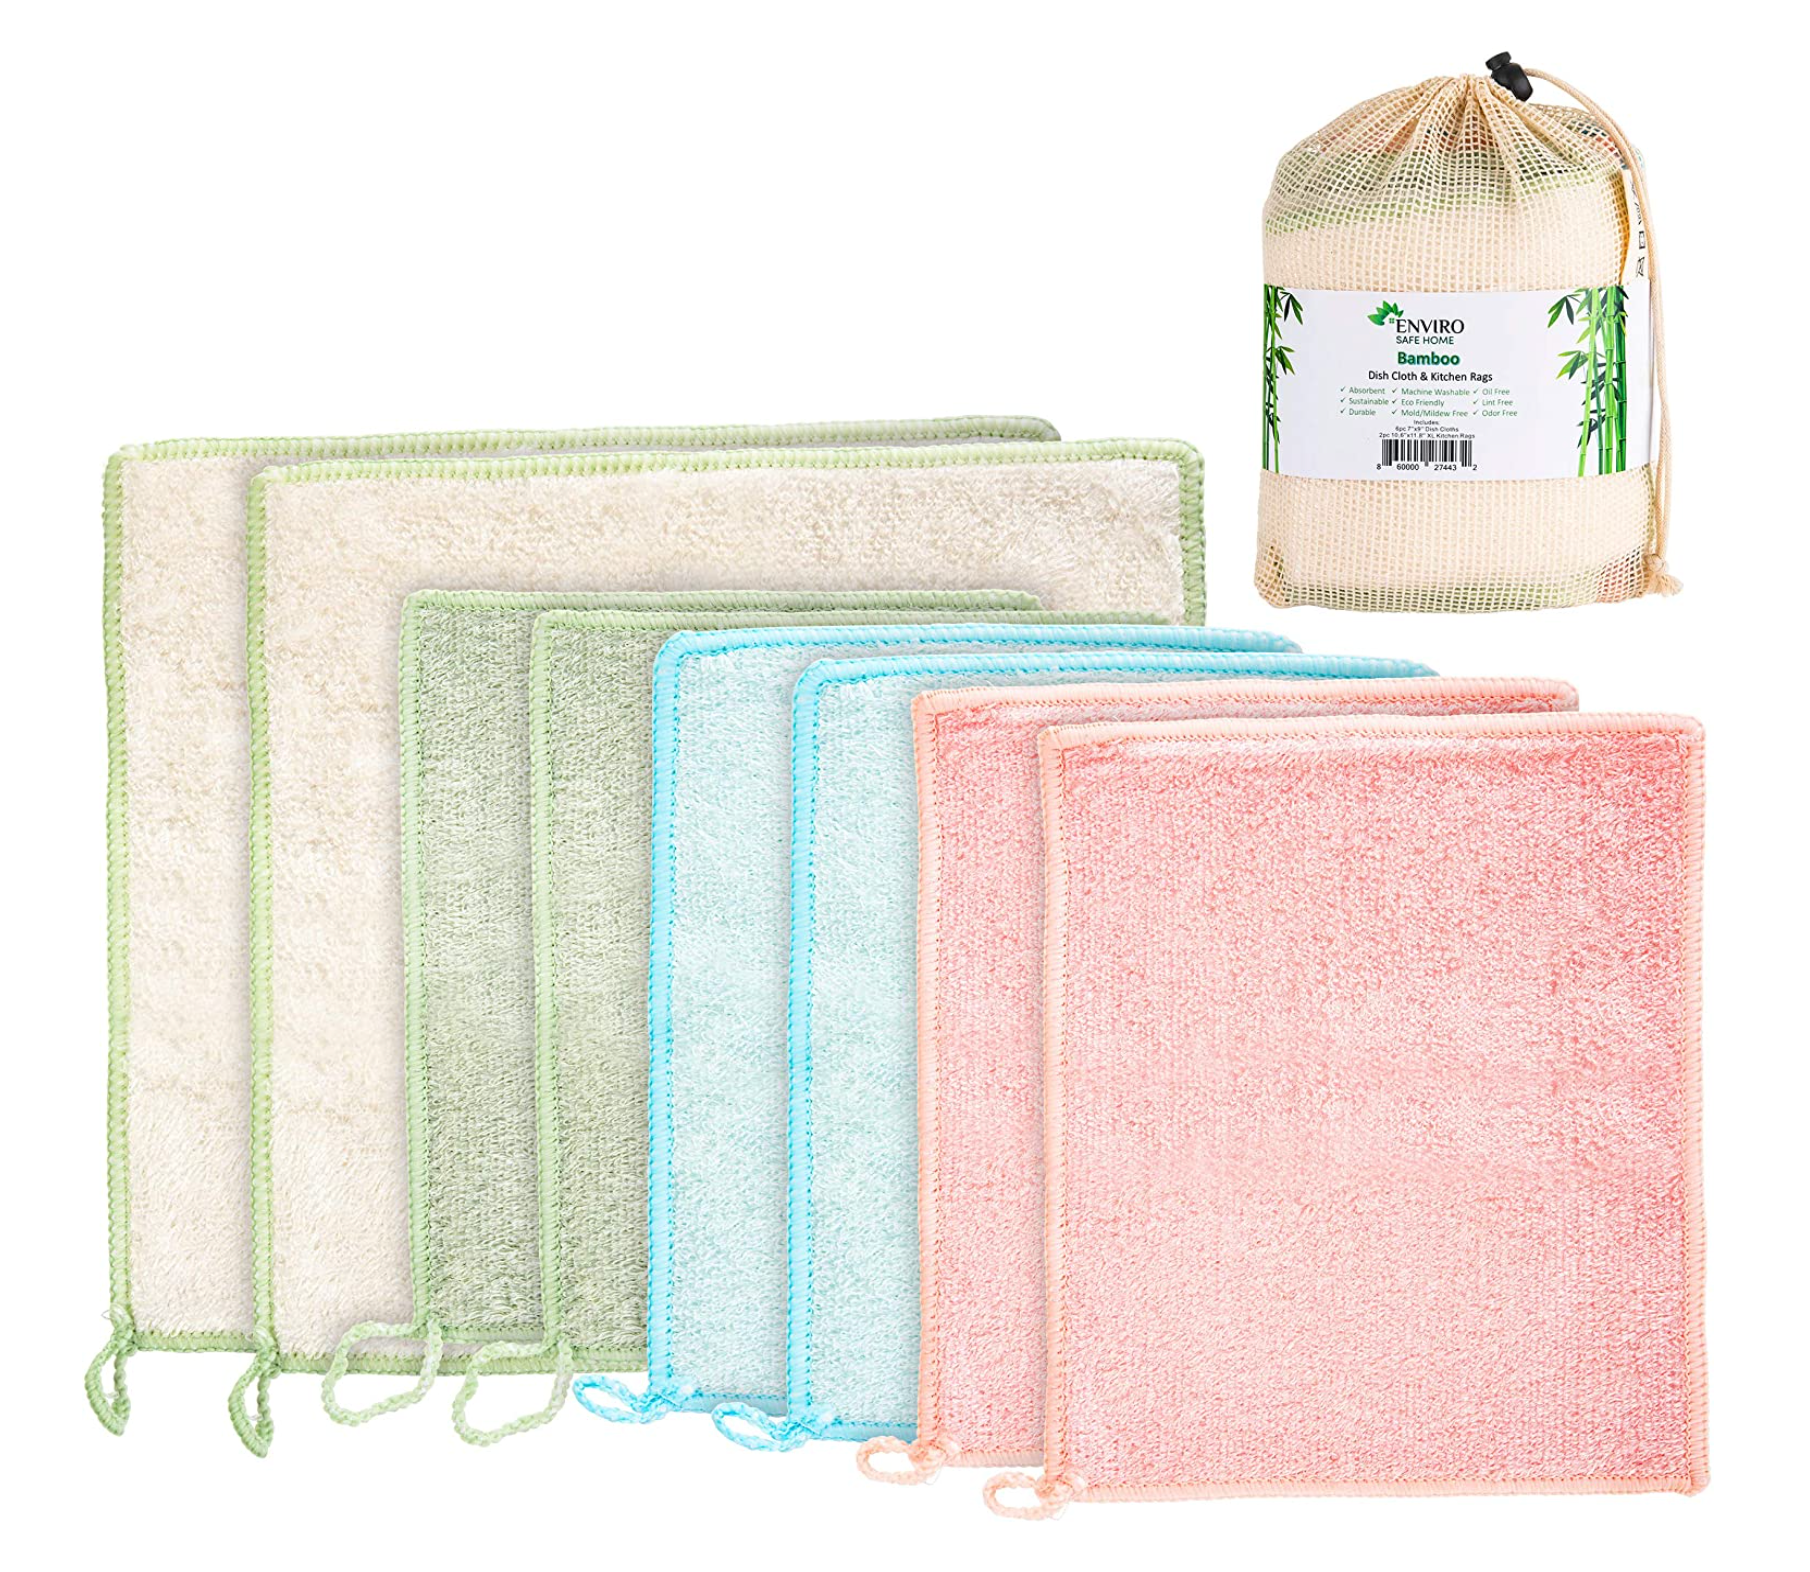 How To Clean Stinky Dishcloths